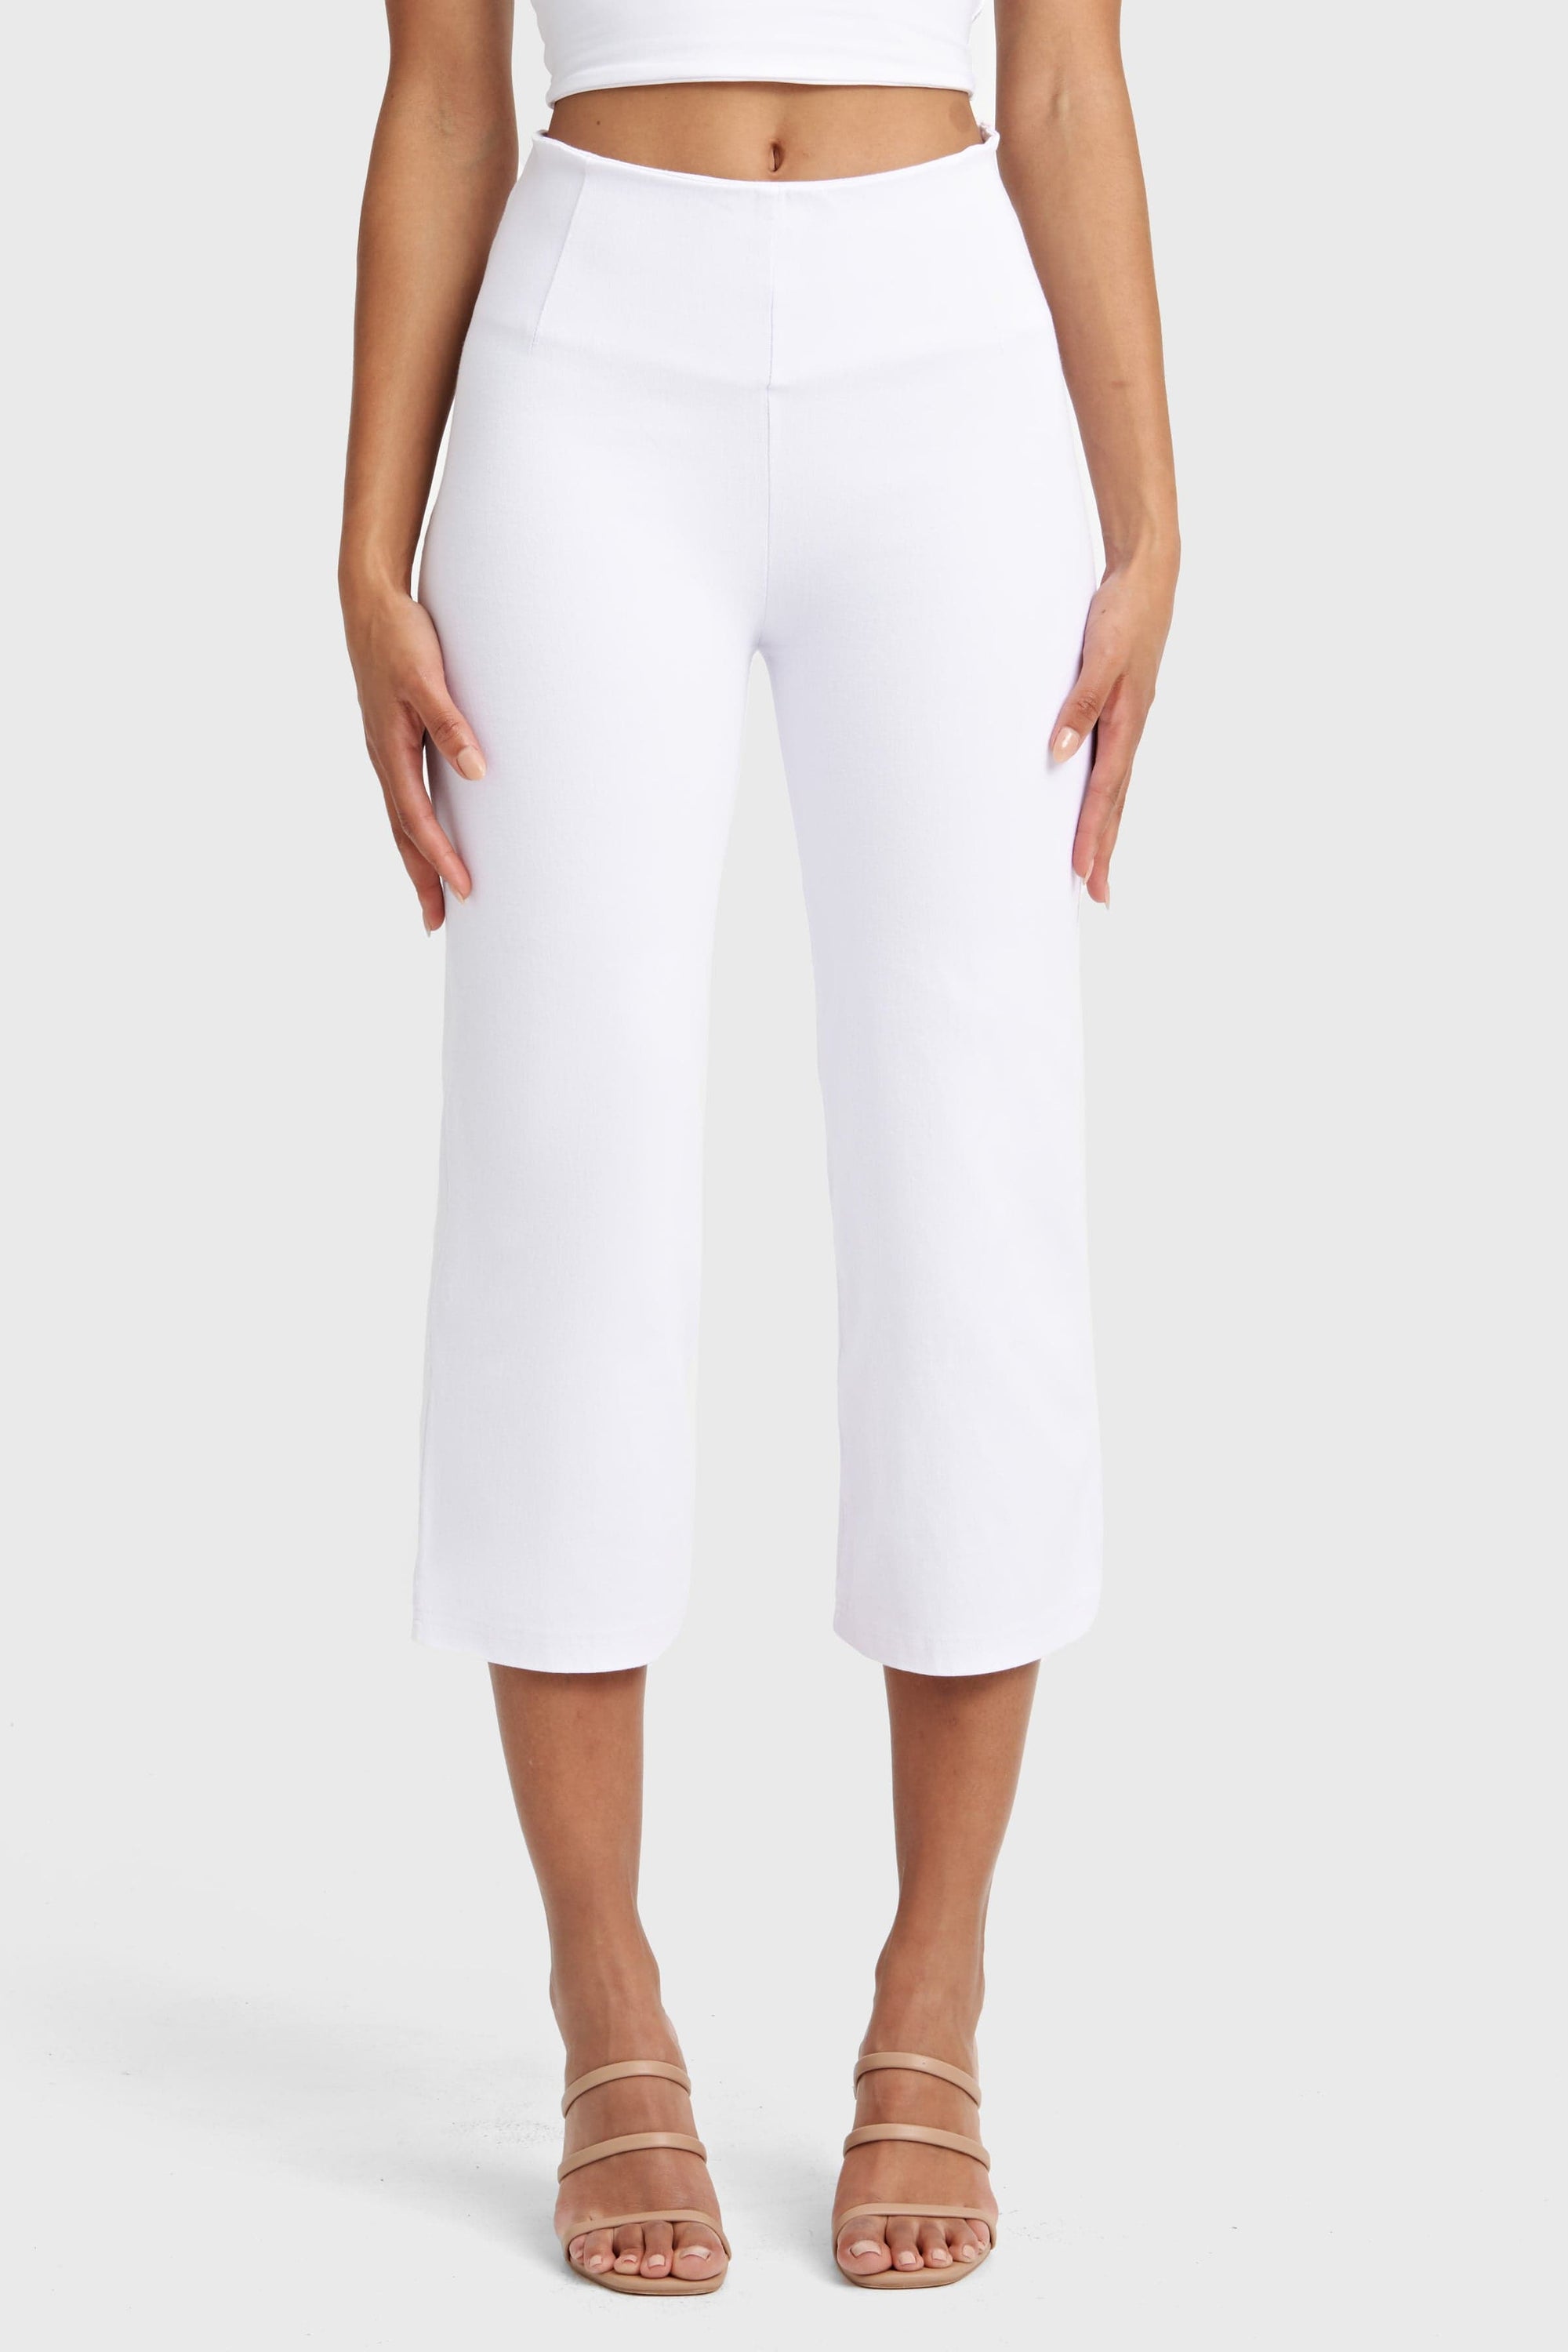 WR.UP® Snug Jeans - High Waisted - Cropped - White 9